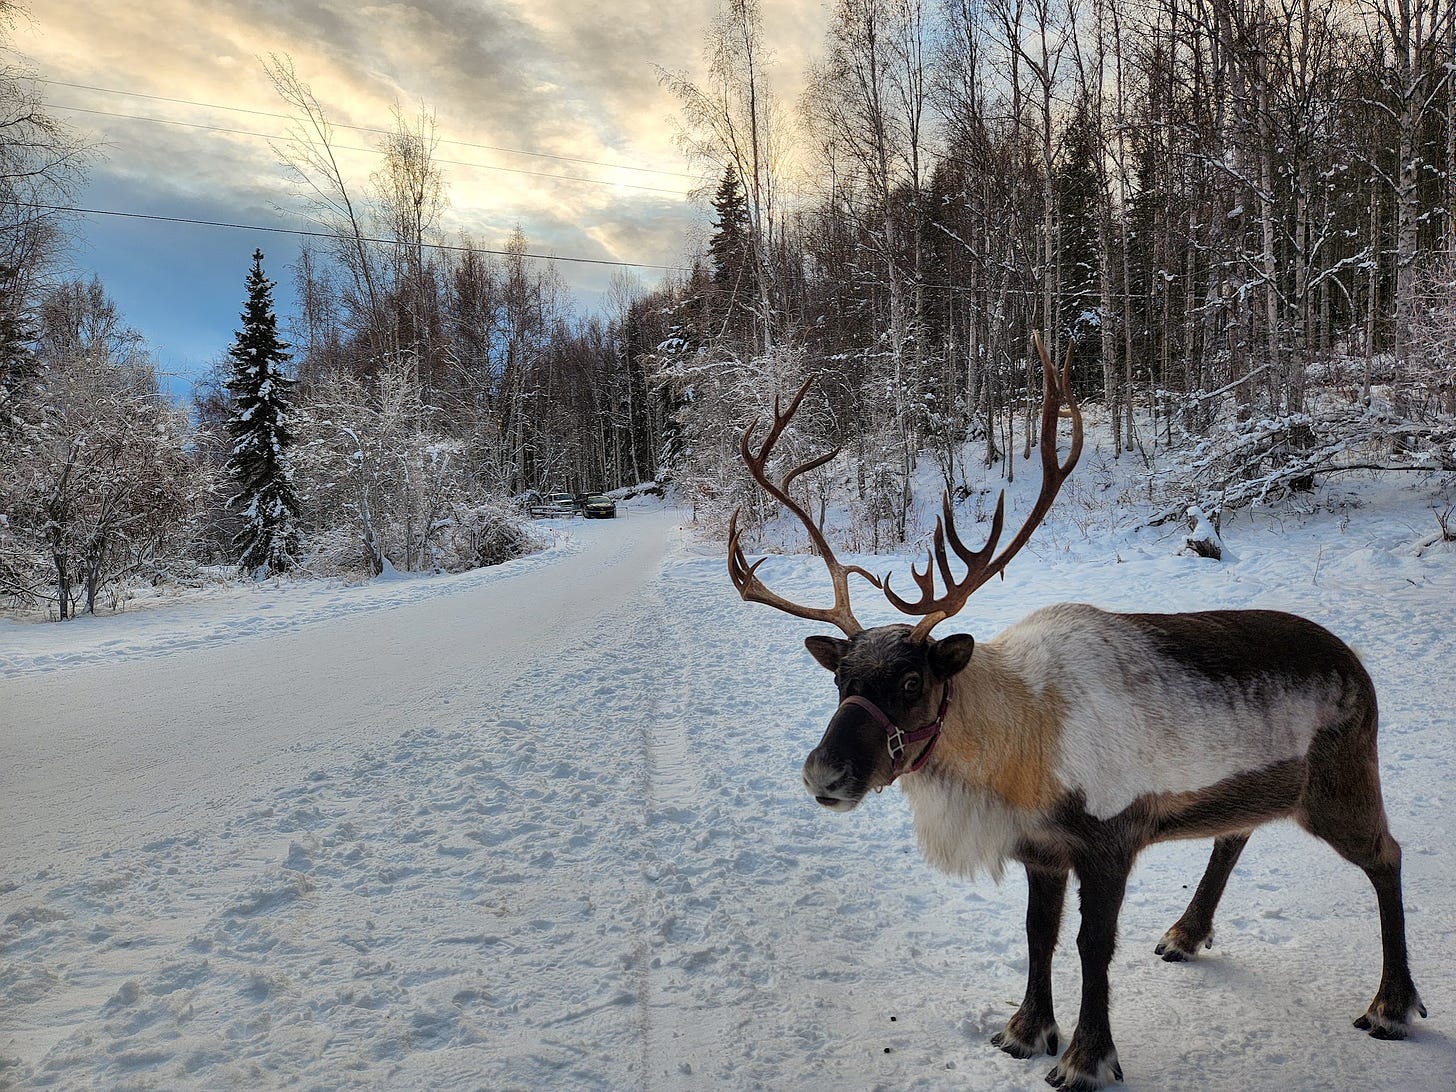 Reindeer in a snowy field with trees around